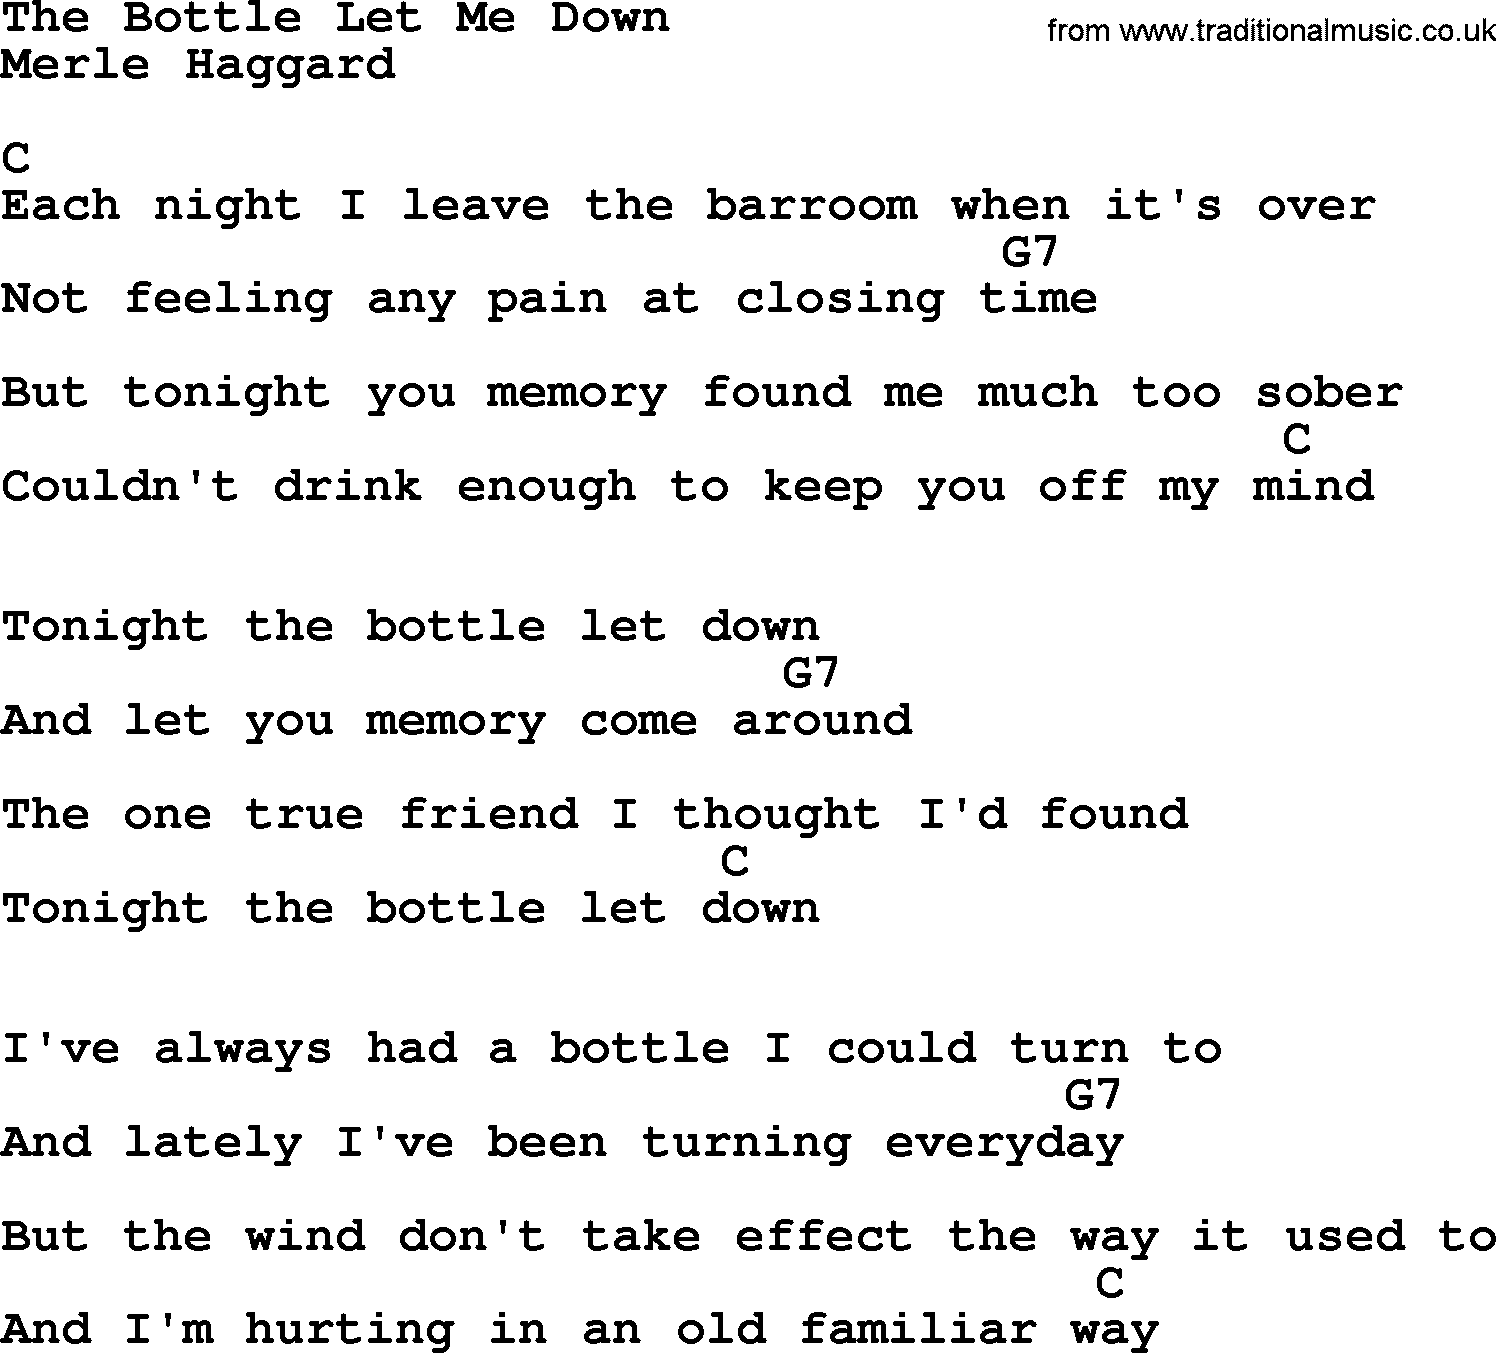 Merle Haggard song: The Bottle Let Me Down, lyrics and chords